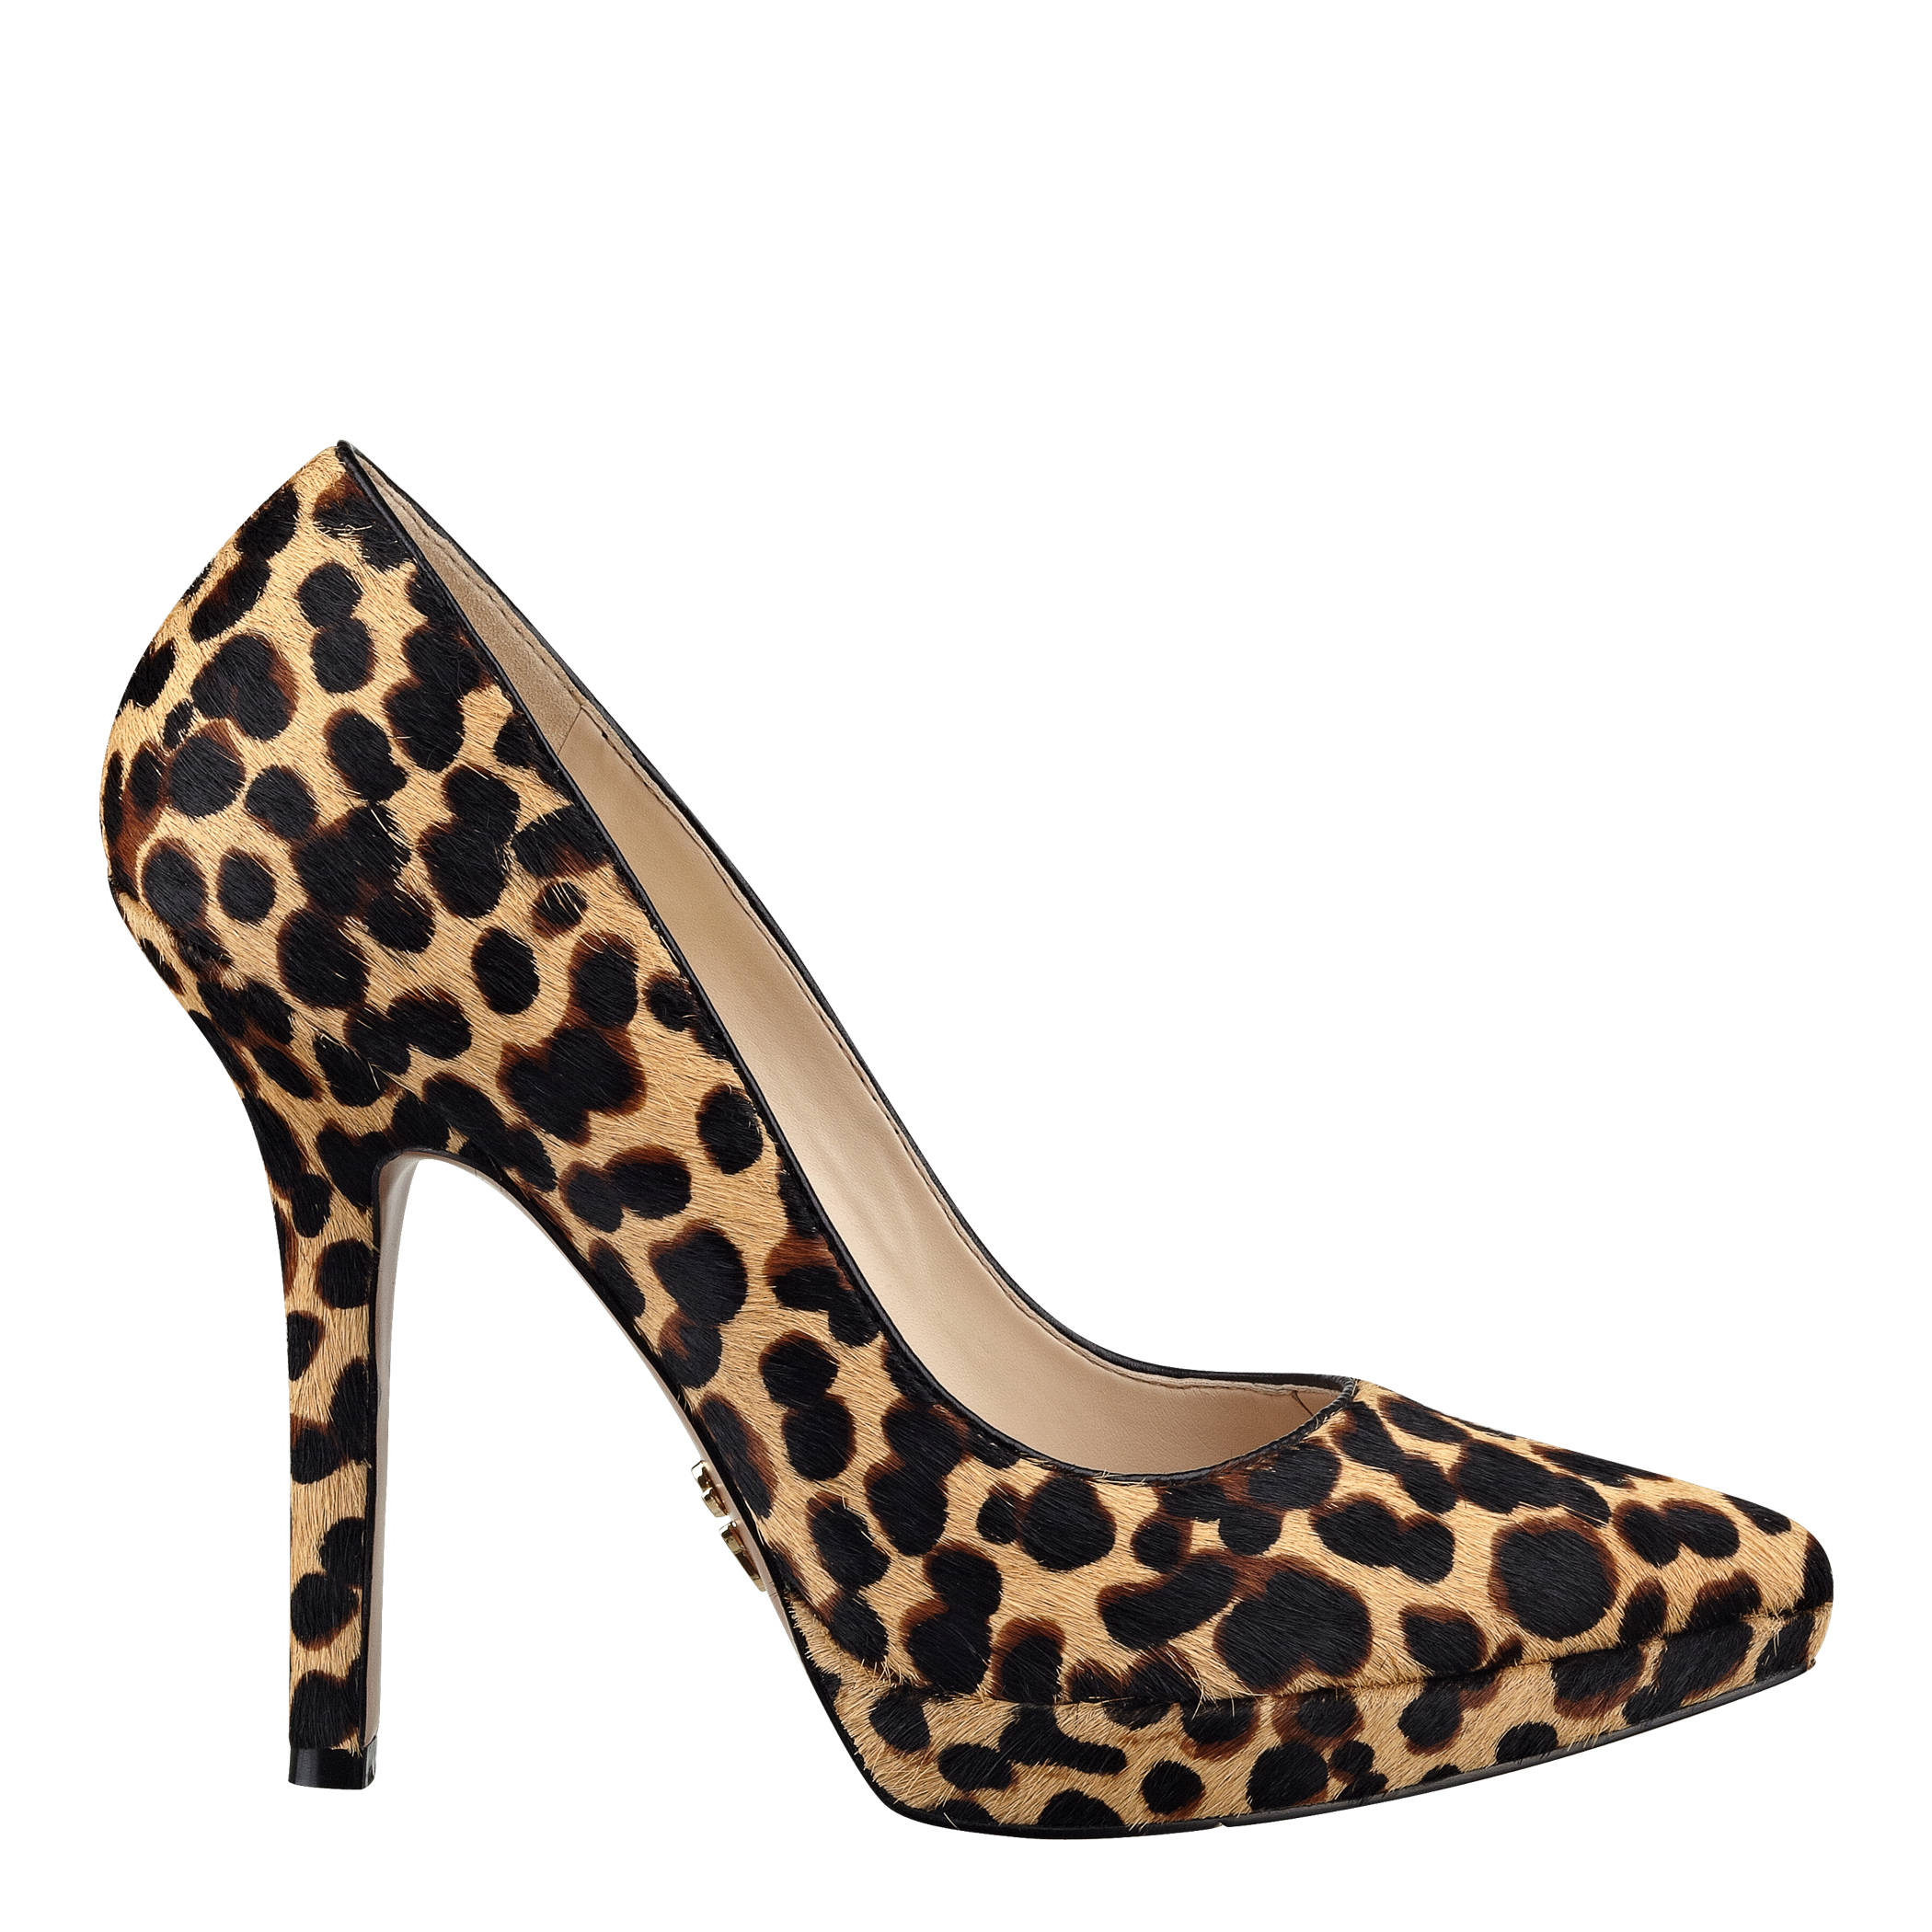 Latest Fashion of Stiletto & Heels Collection for women by Nine West (29)